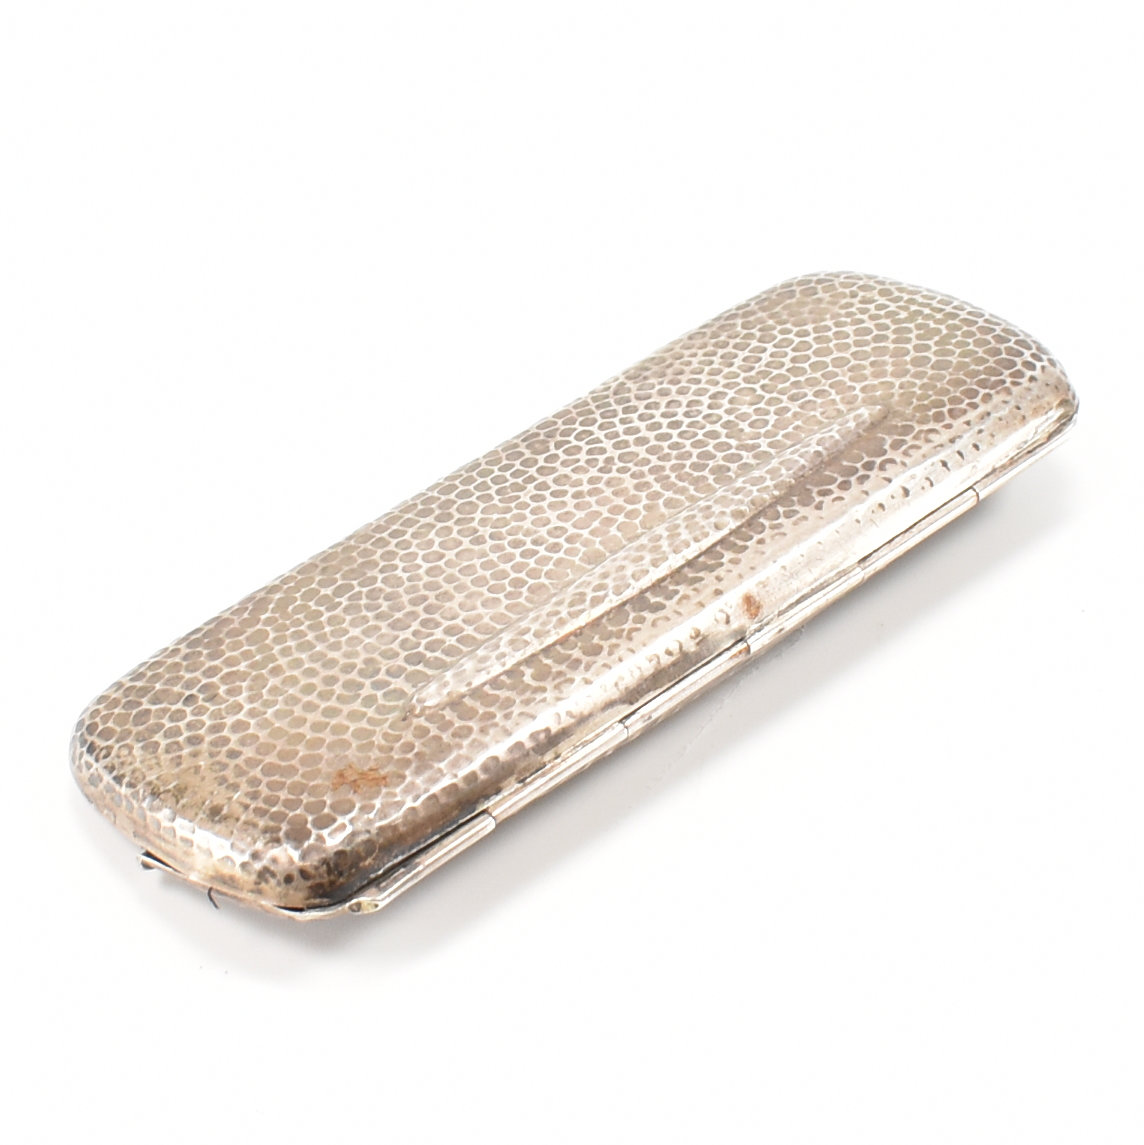 ARTS & CRAFTS SILVER HALLMARKED GLASSES CASE - Image 2 of 5